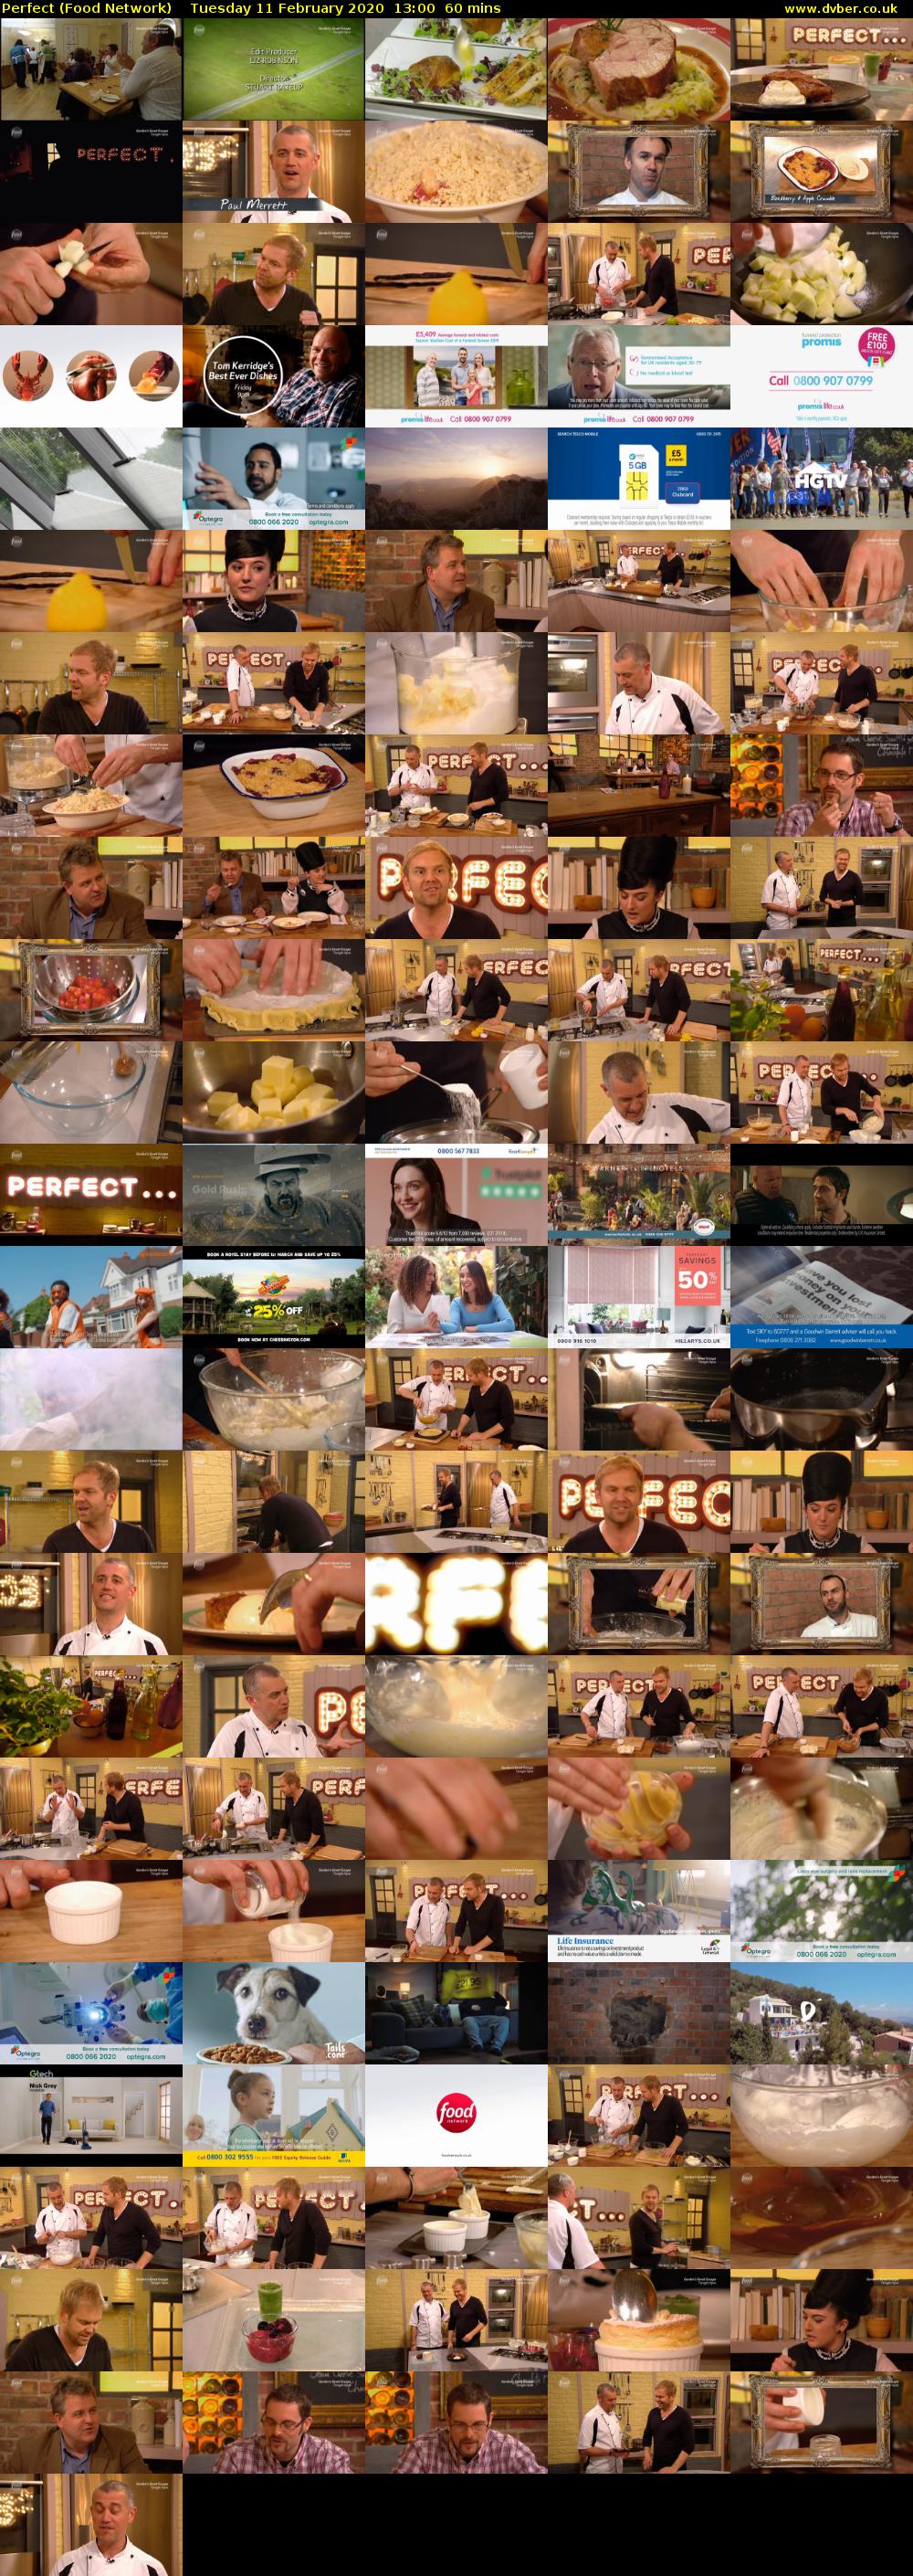 Perfect (Food Network) Tuesday 11 February 2020 13:00 - 14:00